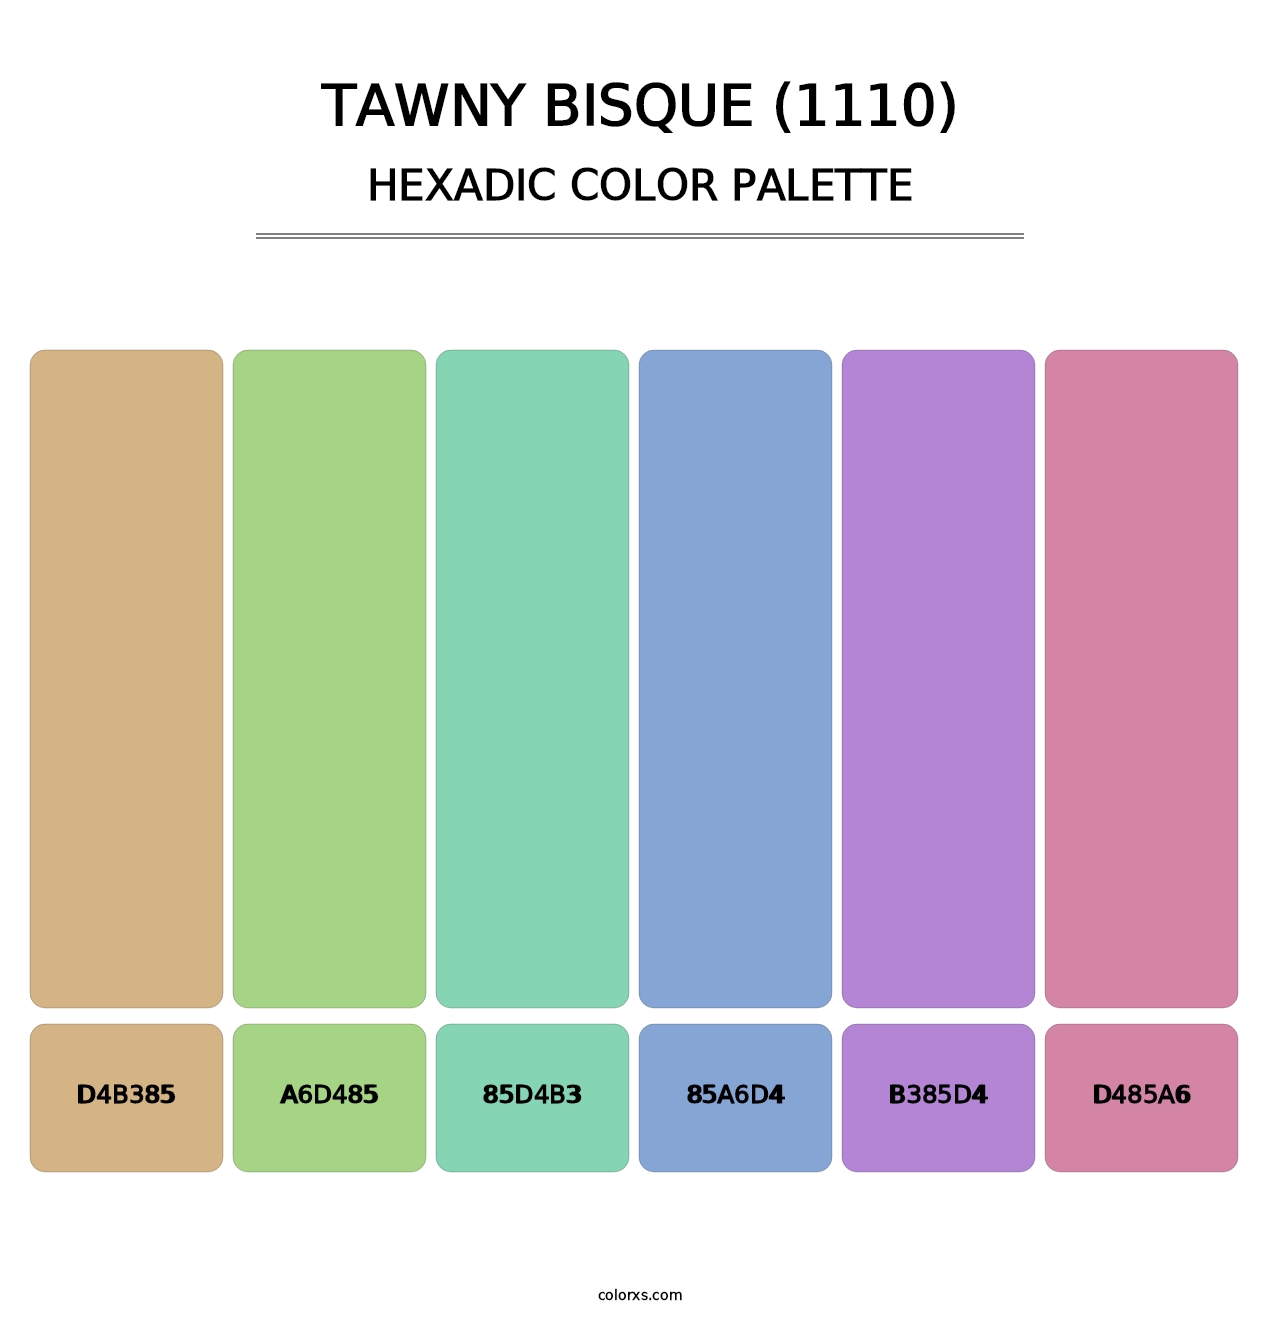 Tawny Bisque (1110) - Hexadic Color Palette